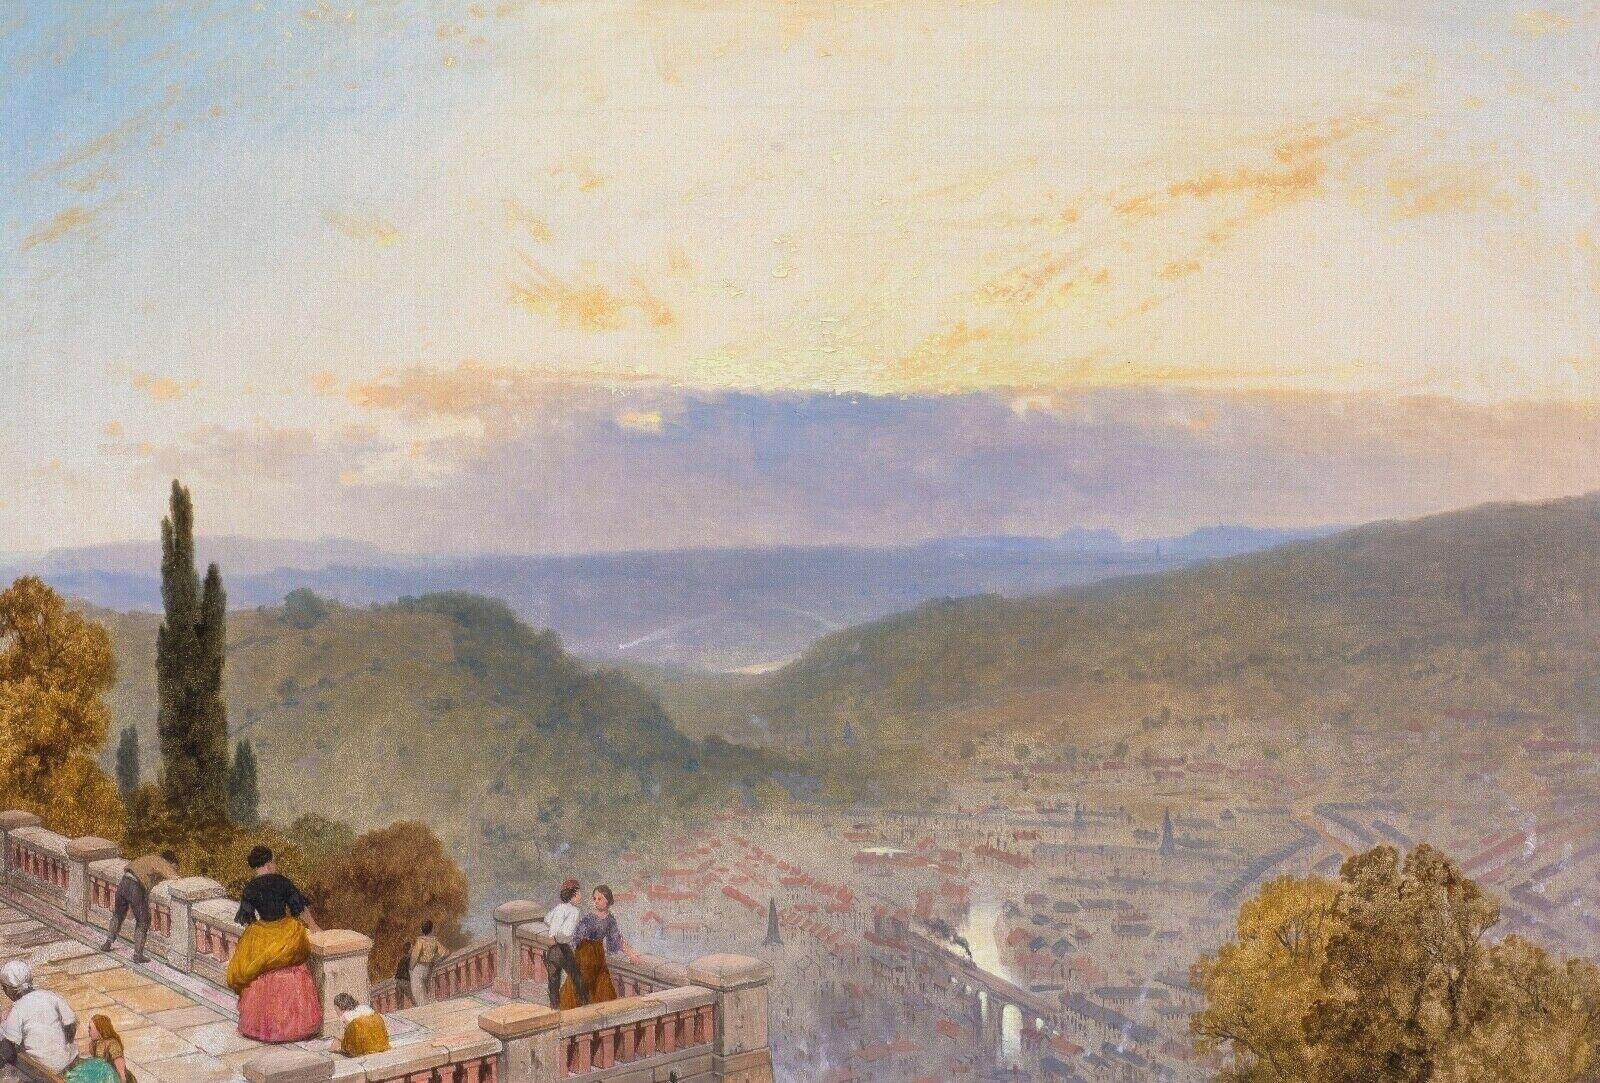 View Of Florence At Sunset From The San Miniato Church, 19th Century - Painting by James Baker Pyne